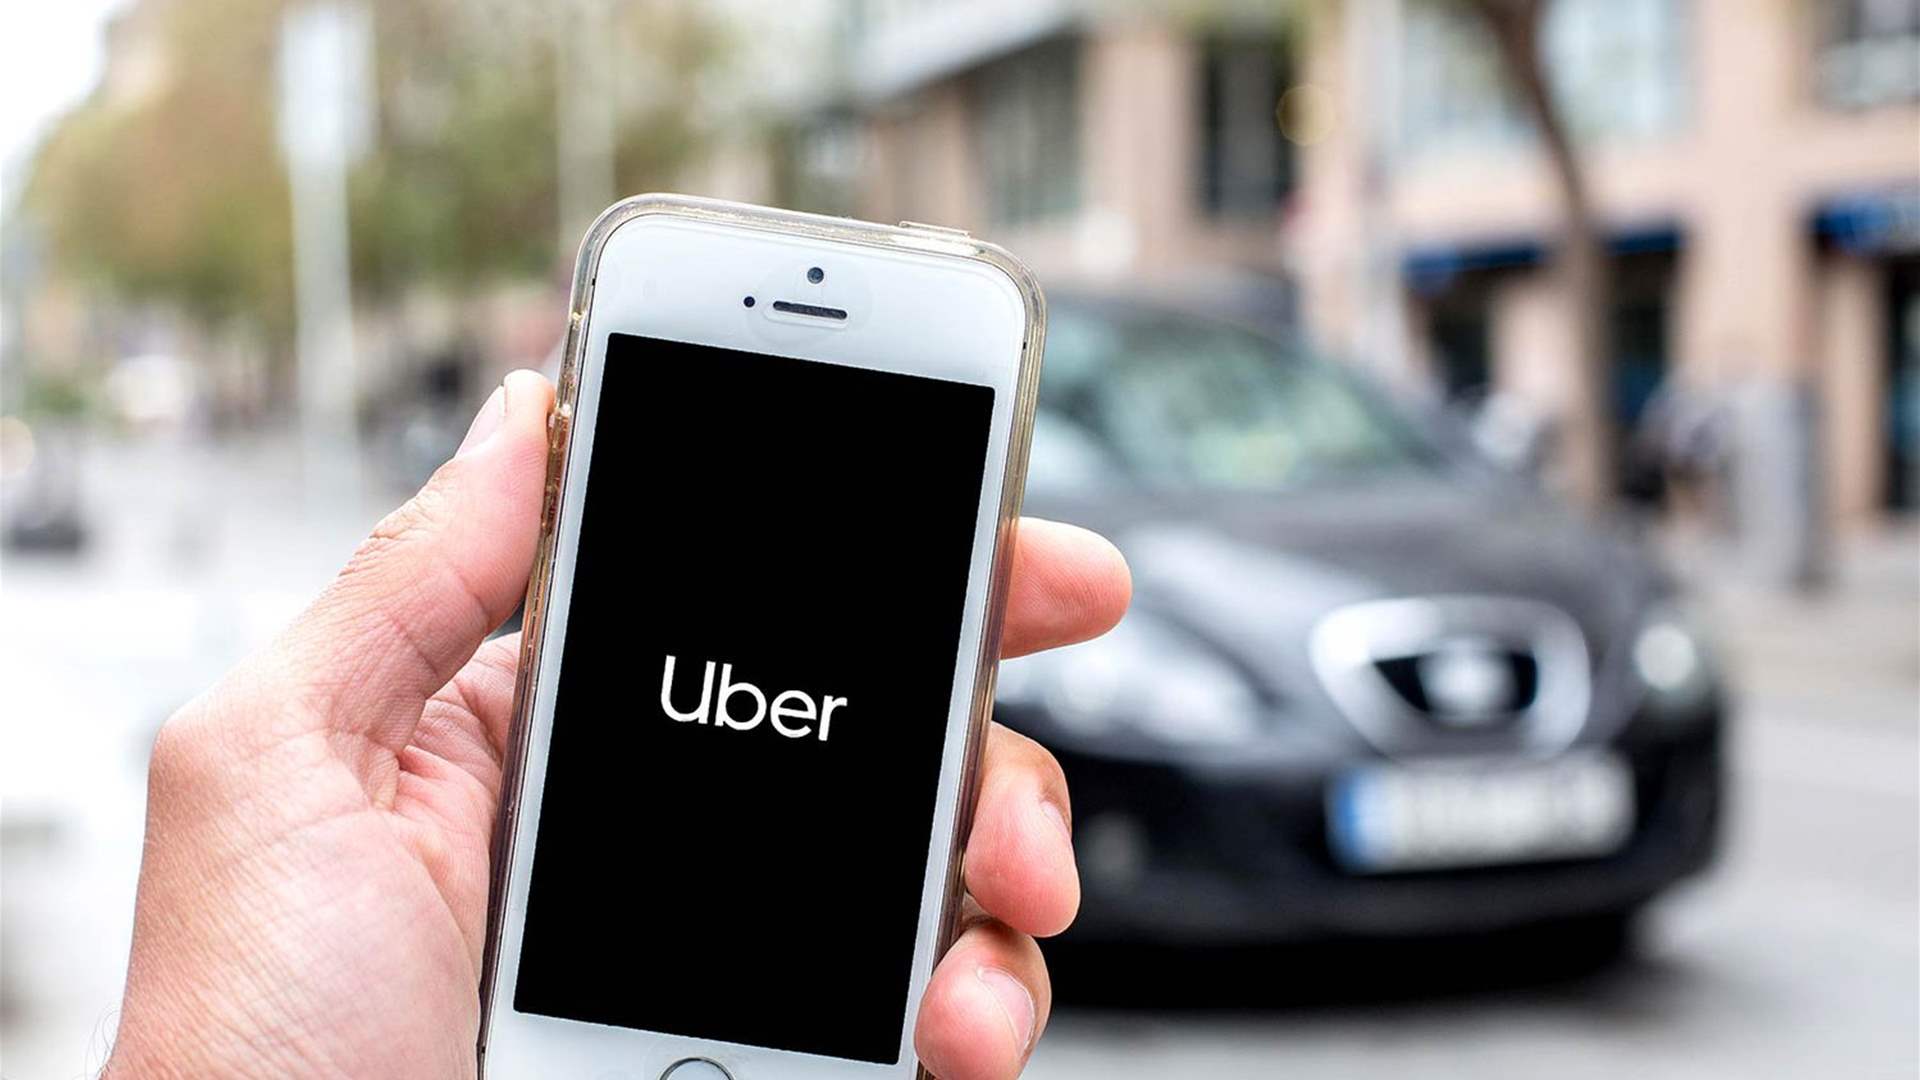 Uber is getting tighter with taxi companies